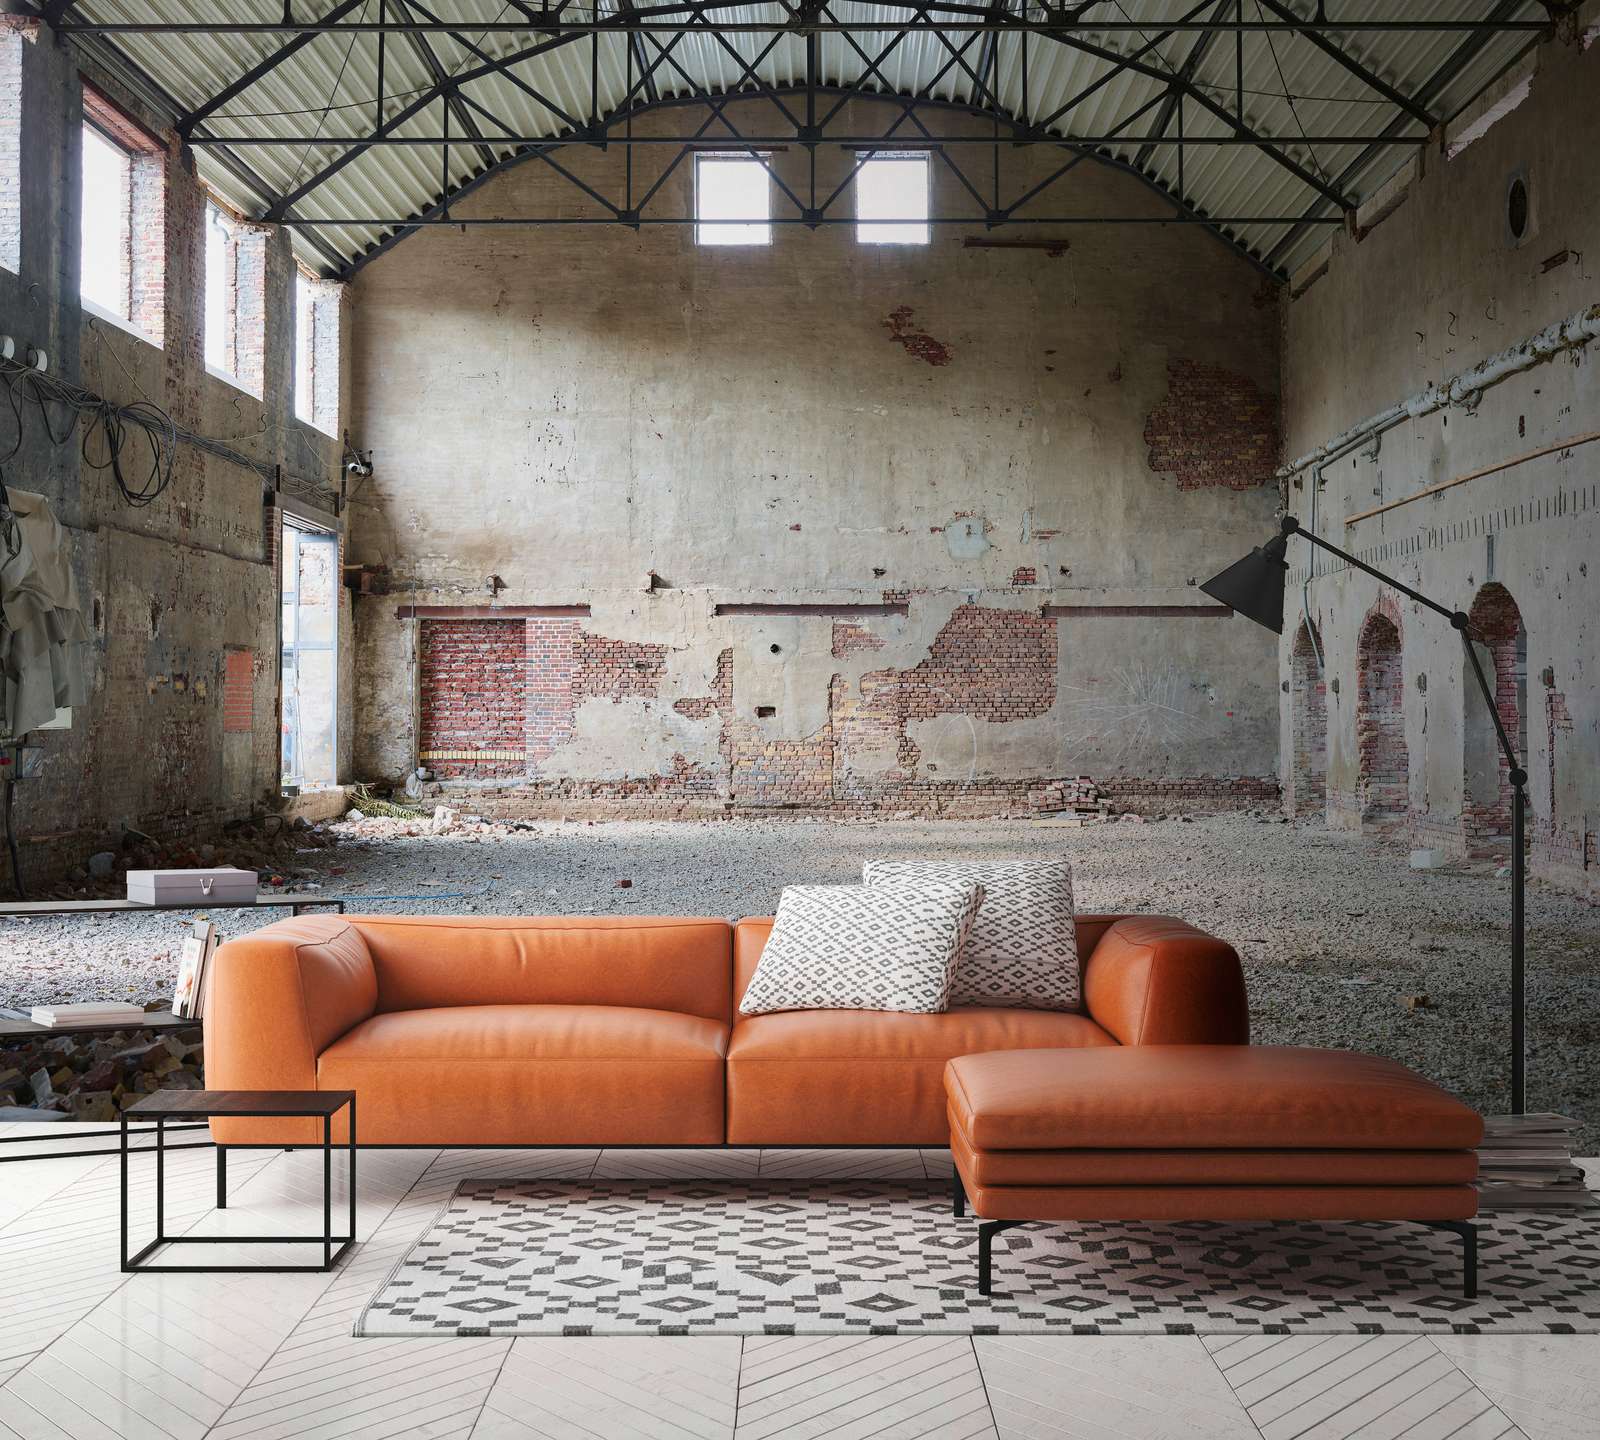             Photo wallpaper with abandoned industrial hall - Beige, Brown
        